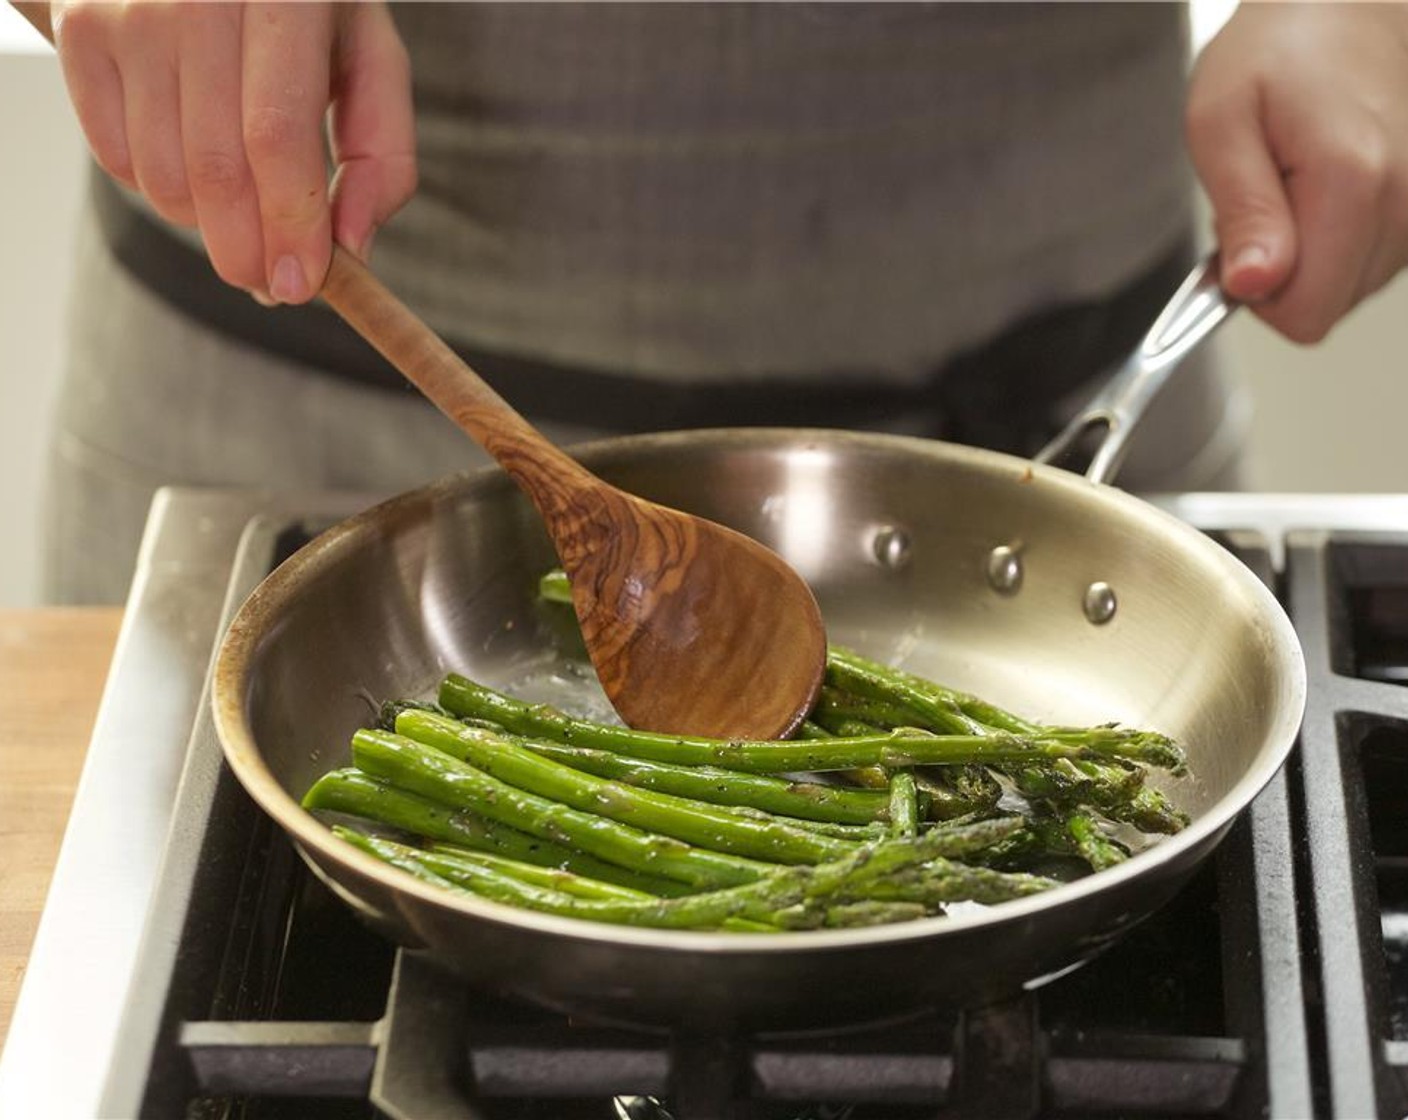 step 13 In a medium sauté pan over medium-high heat, add one tablespoon of oil. When hot, add the asparagus, Salt (1/4 tsp) and Ground Black Pepper (1/2 tsp). Saute for two to three minutes until cooked, and set aside.